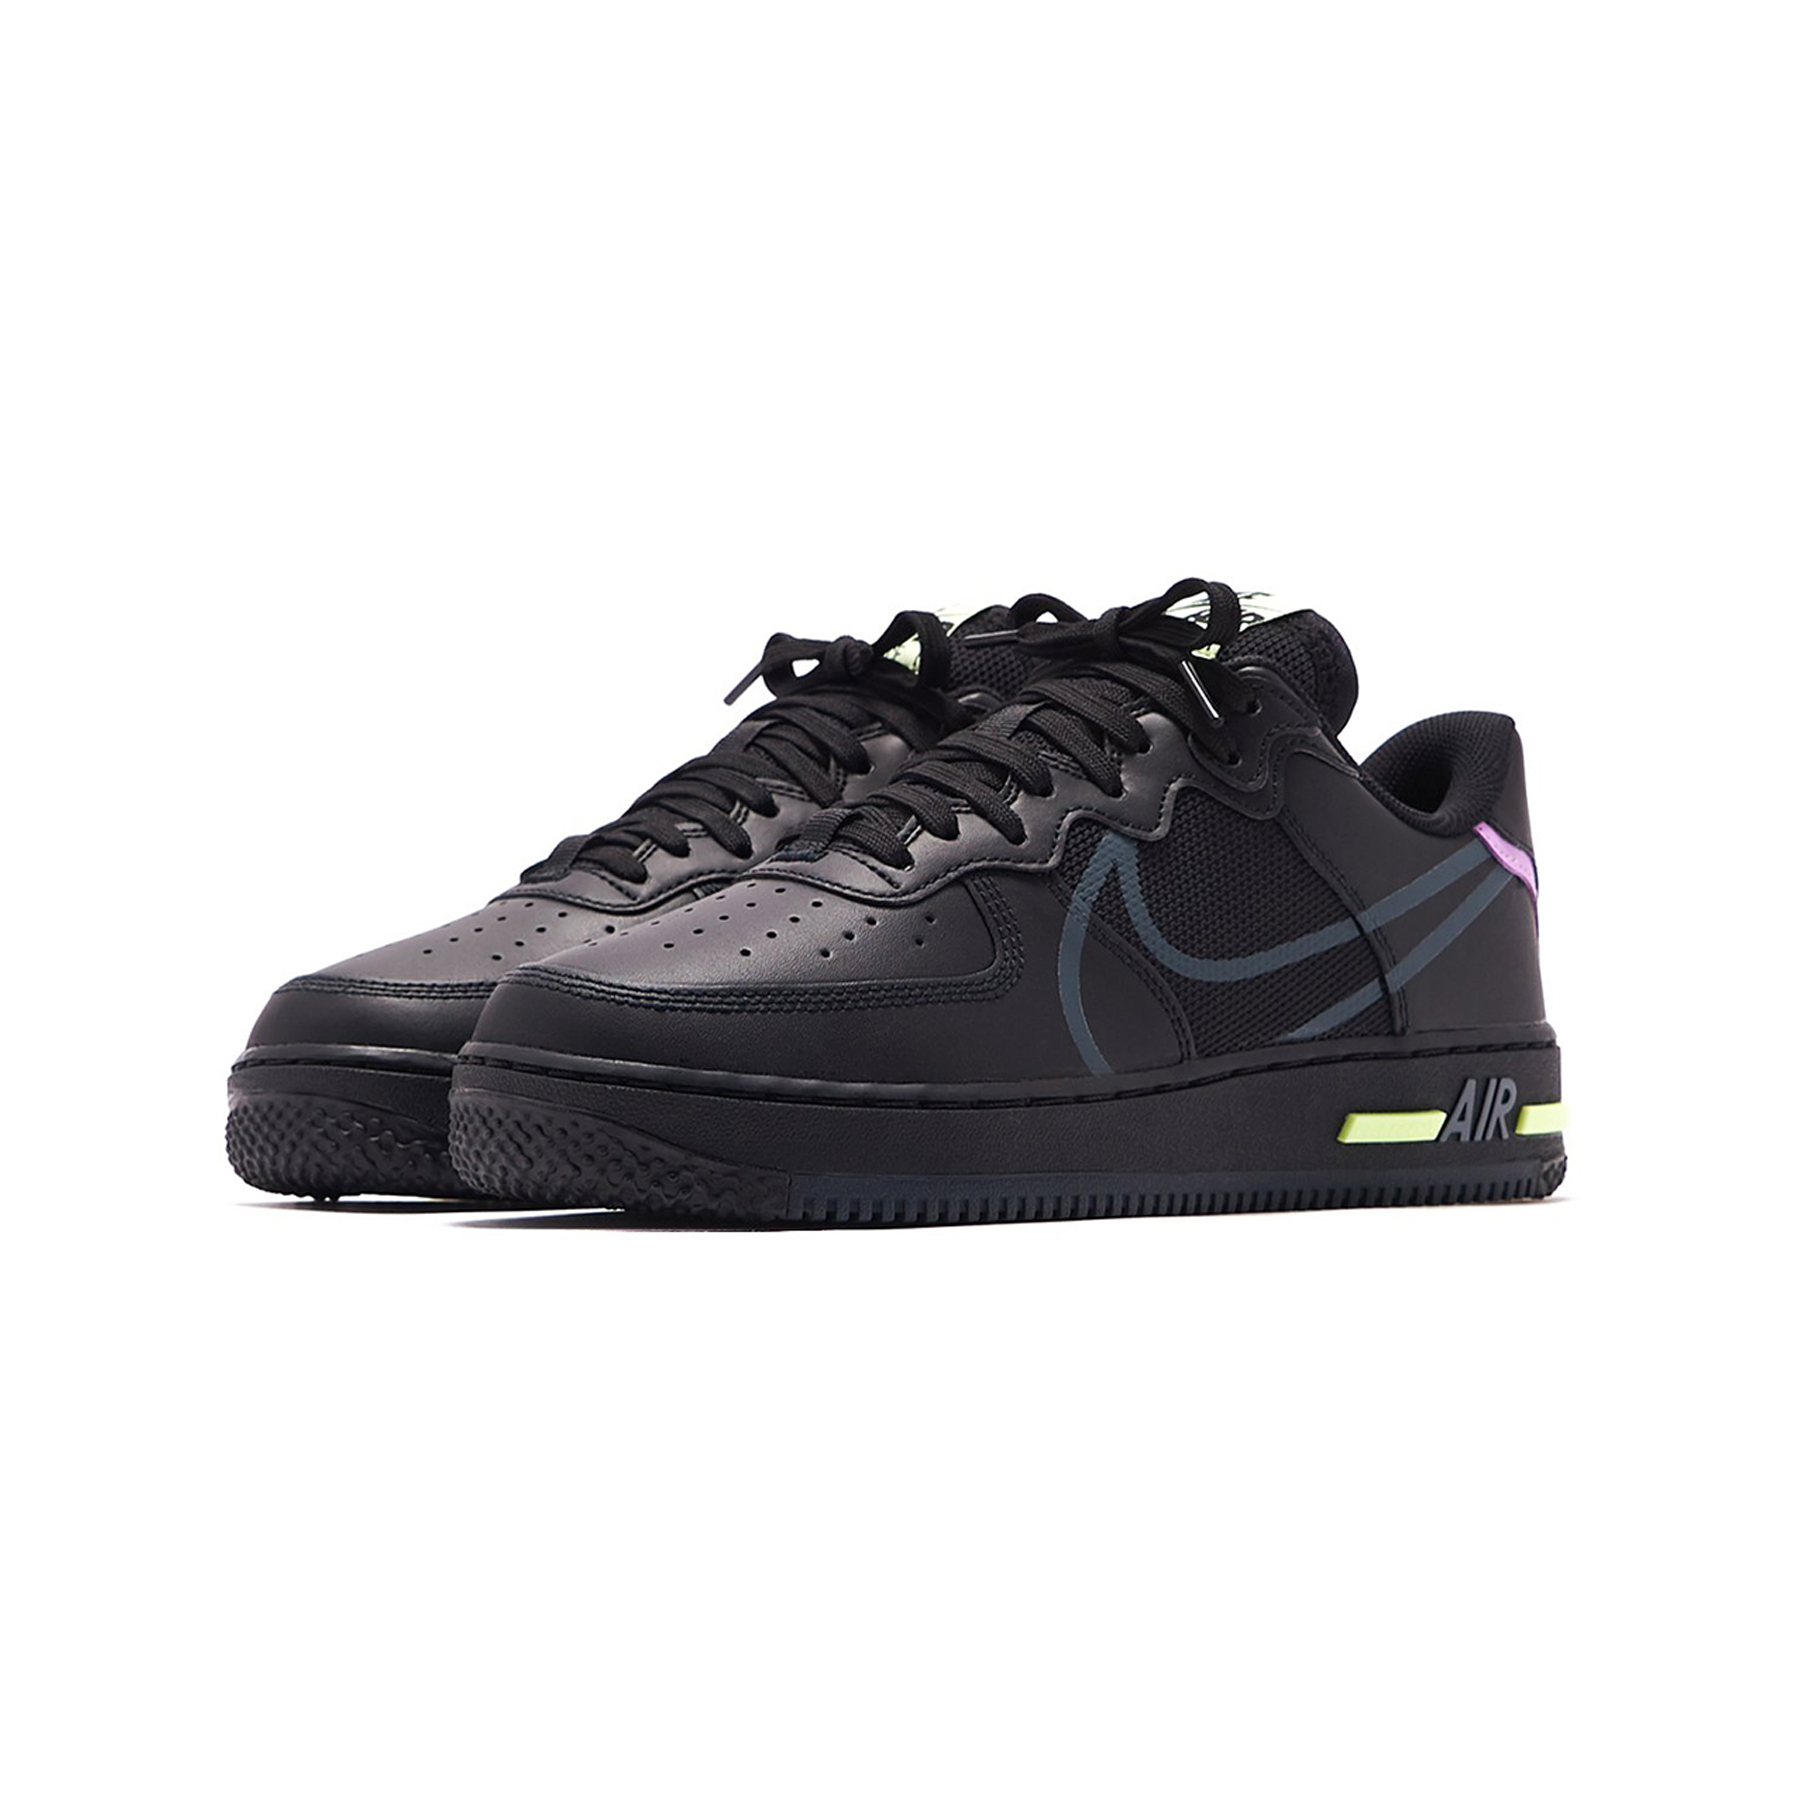 Nike Air Force 1 React D/MS/X Black/Anthracite, Drops